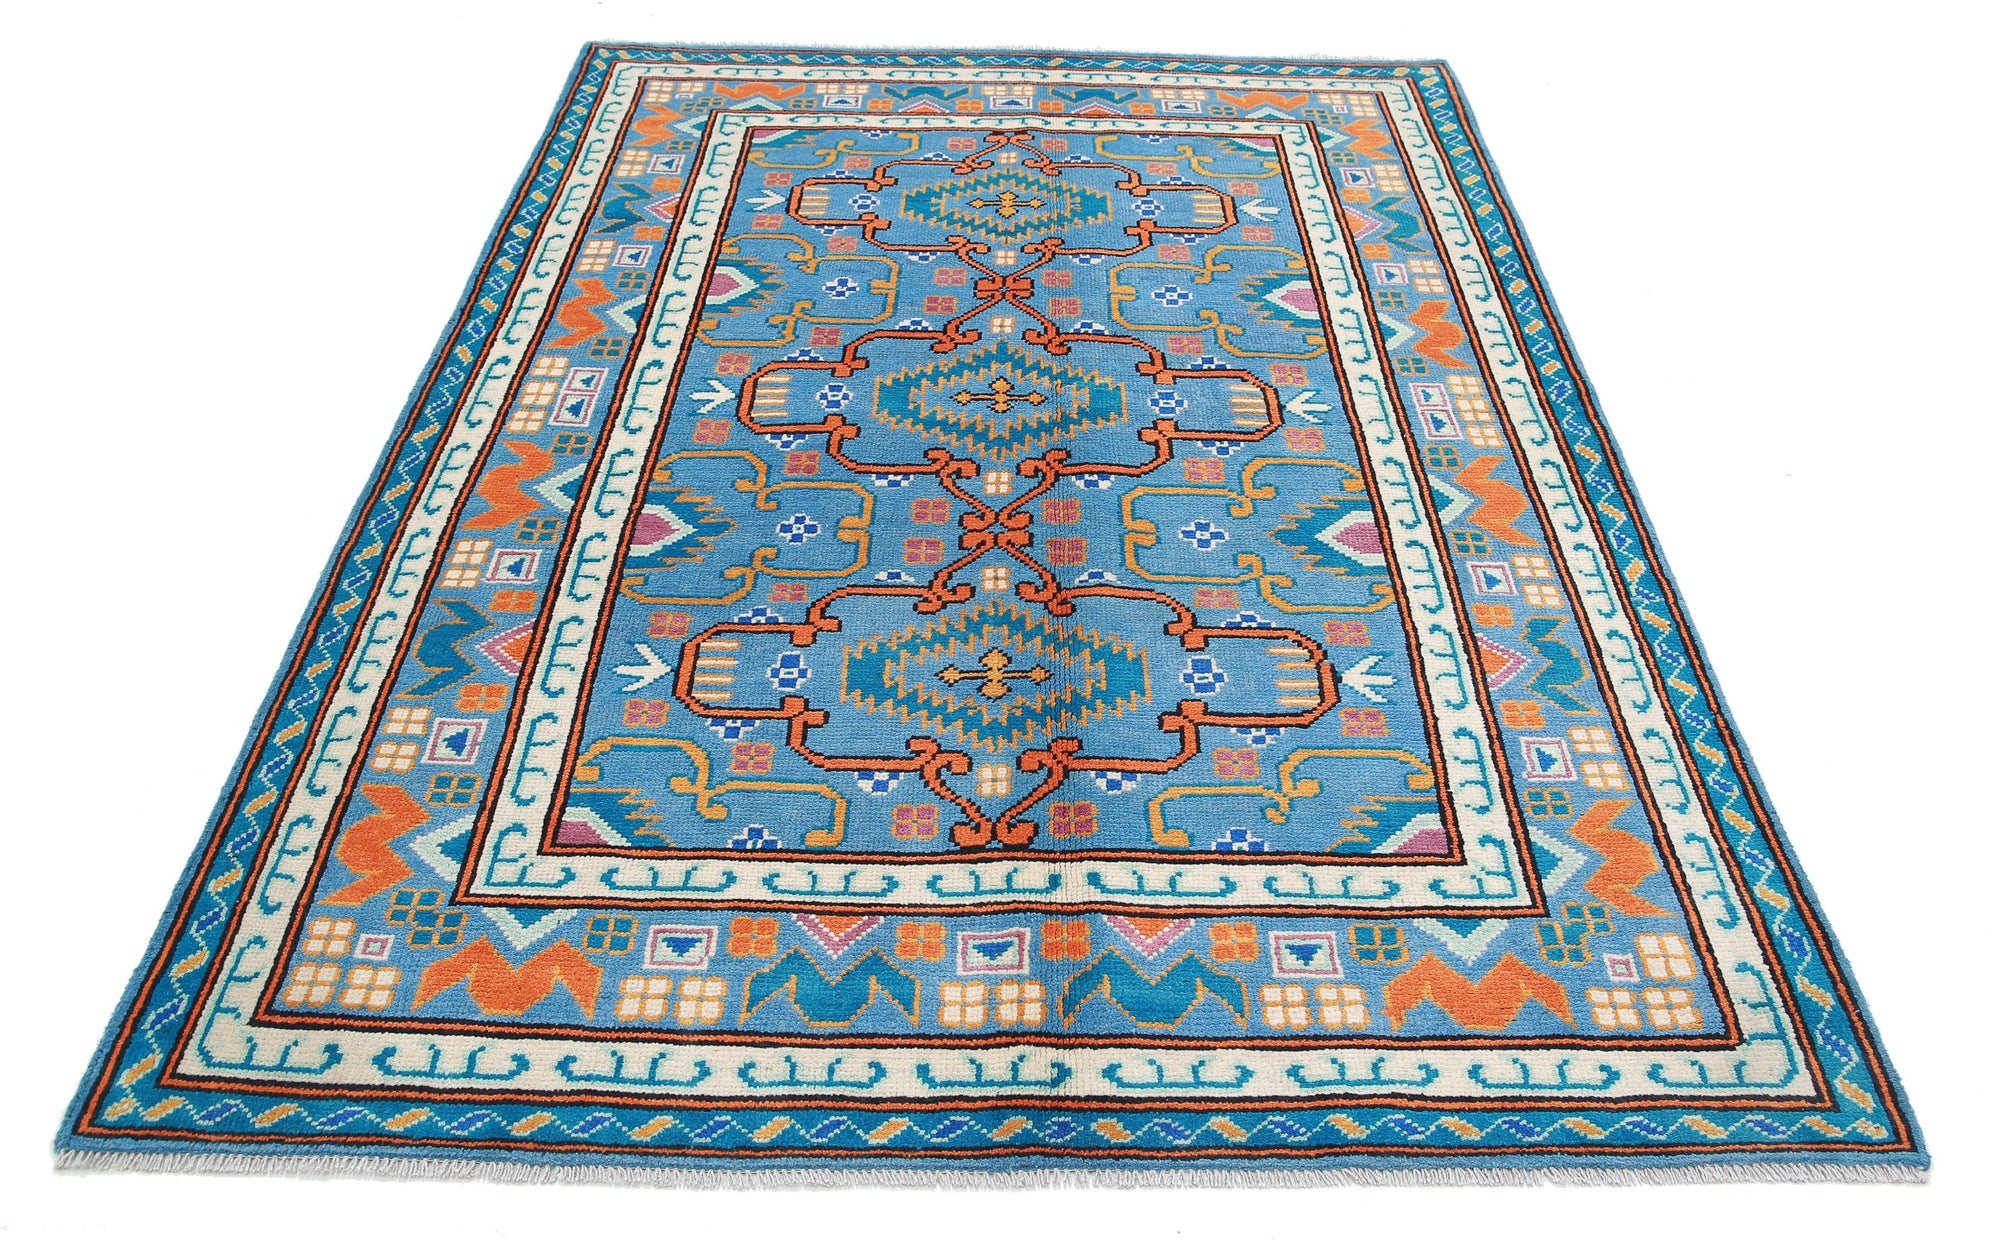 Revival-hand-knotted-qarghani-wool-rug-5014222-3.jpg